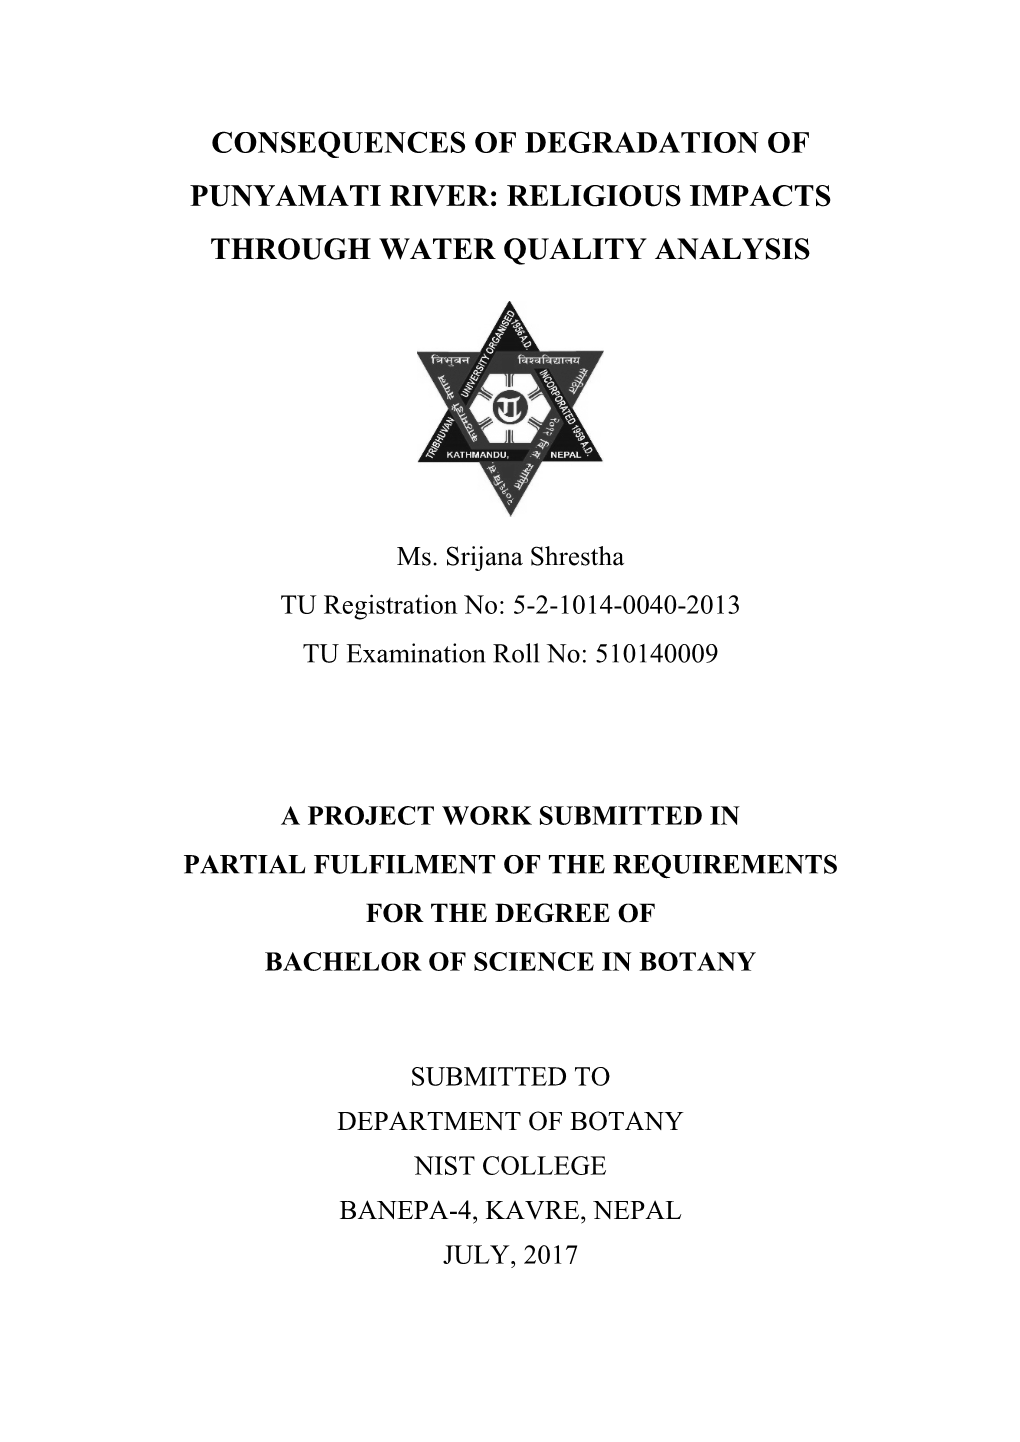 Consequences of Degradation of Punyamati River: Religious Impacts Through Water Quality Analysis